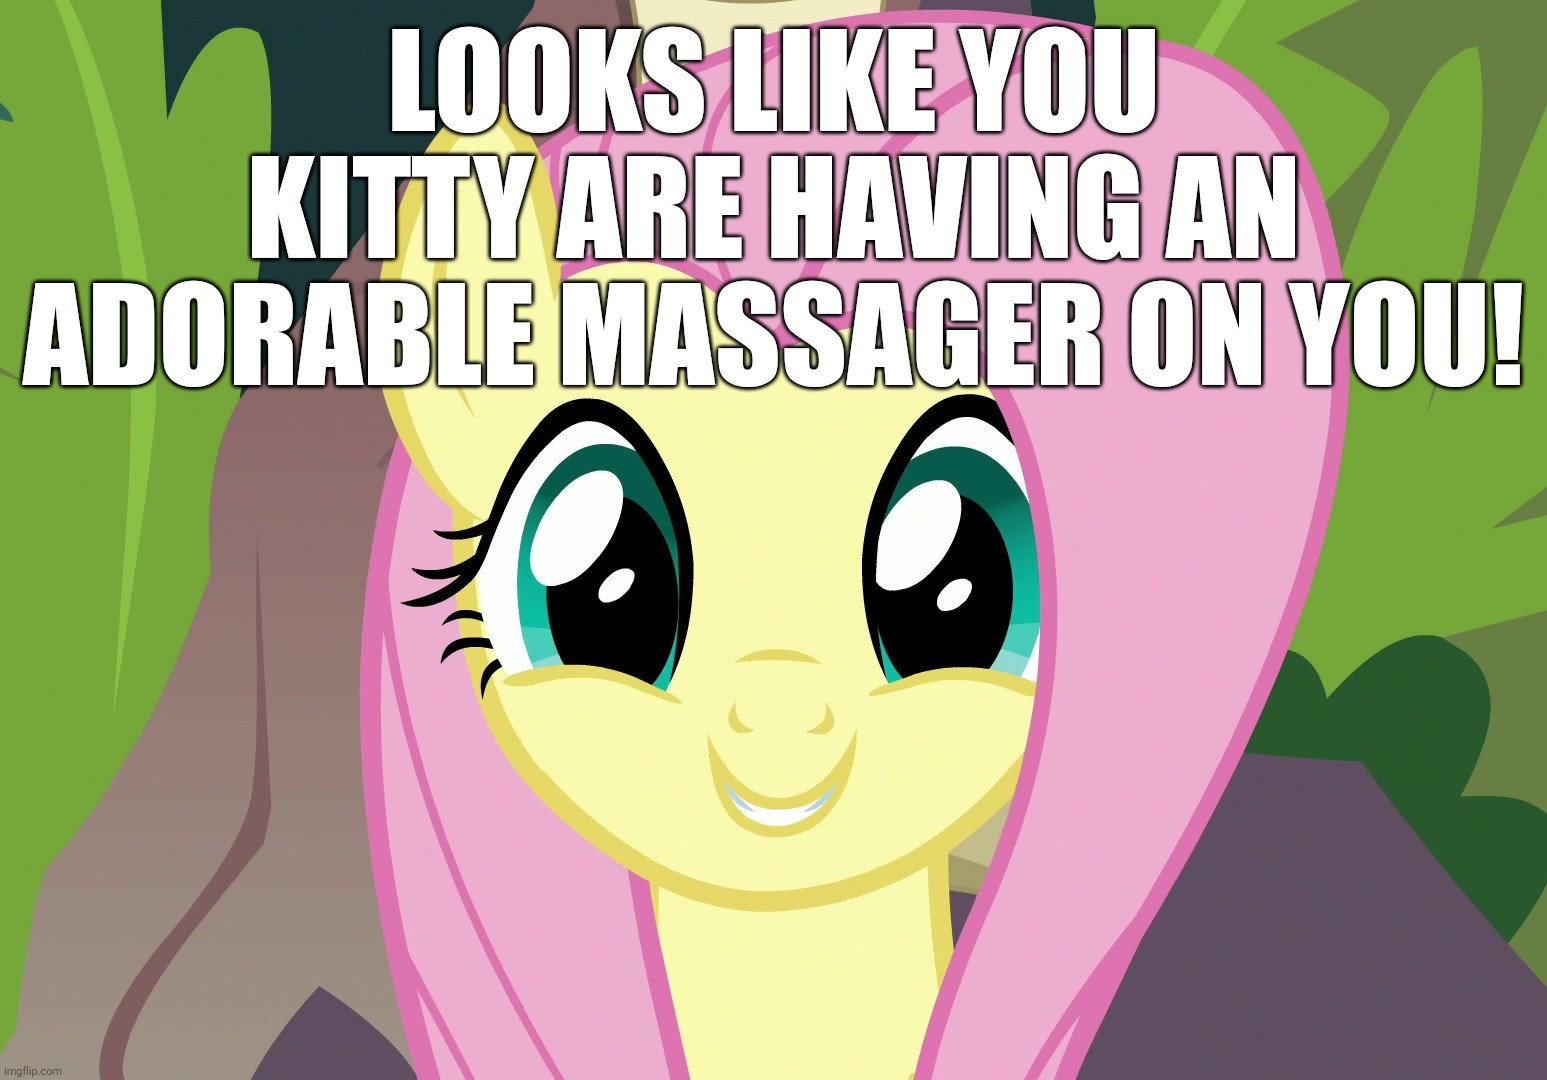 LOOKS LIKE YOU KITTY ARE HAVING AN ADORABLE MASSAGER ON YOU! | made w/ Imgflip meme maker